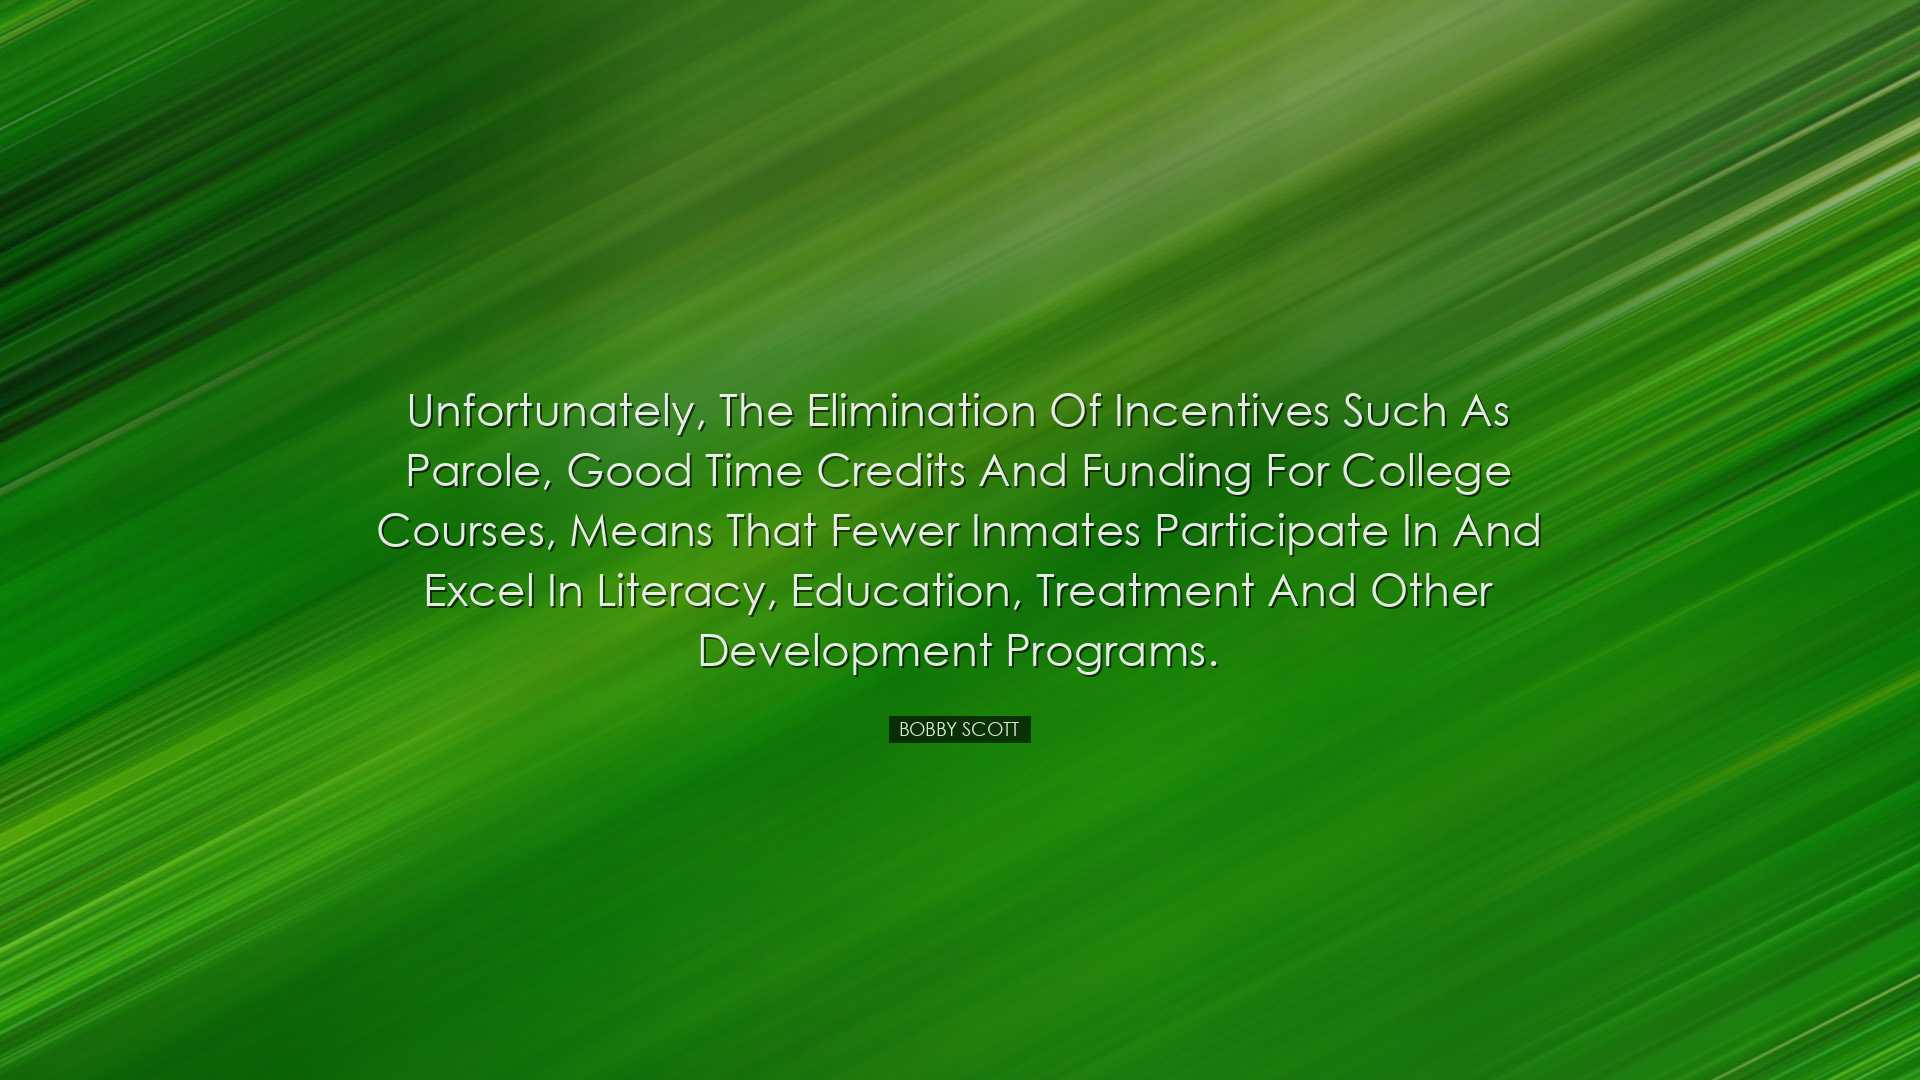 Unfortunately, the elimination of incentives such as parole, good